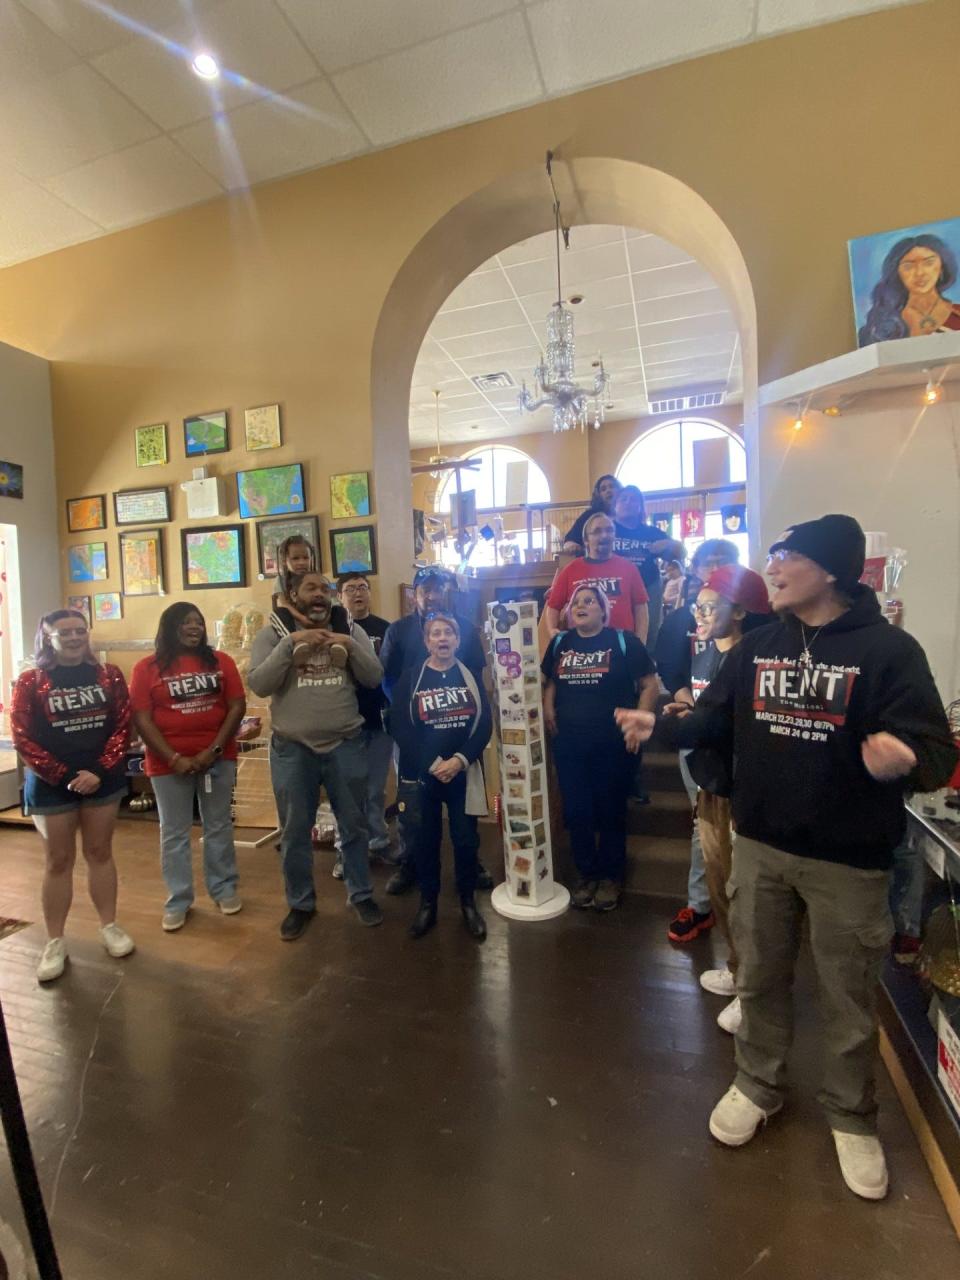 Cast of Alamogordo Music Theatre surprised residents throughout Alamogordo in a series of flash mobs throughout the city in order to promote their production of 'RENT.'